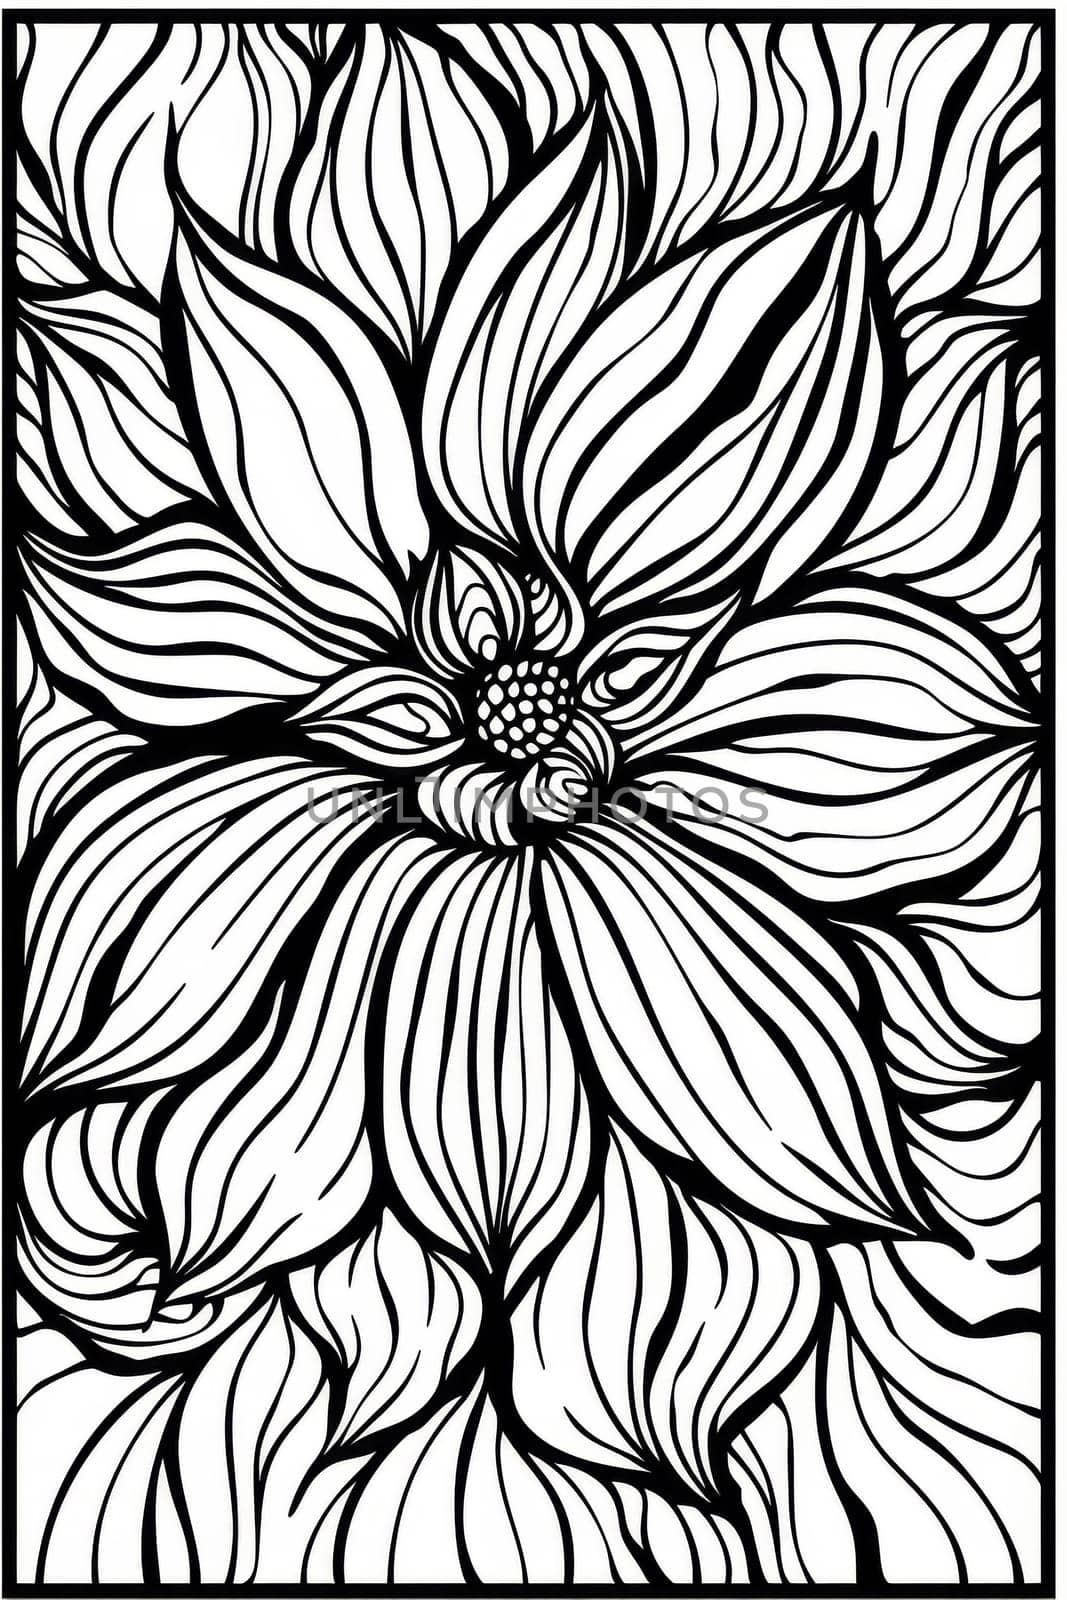 A black and white drawing of a flower